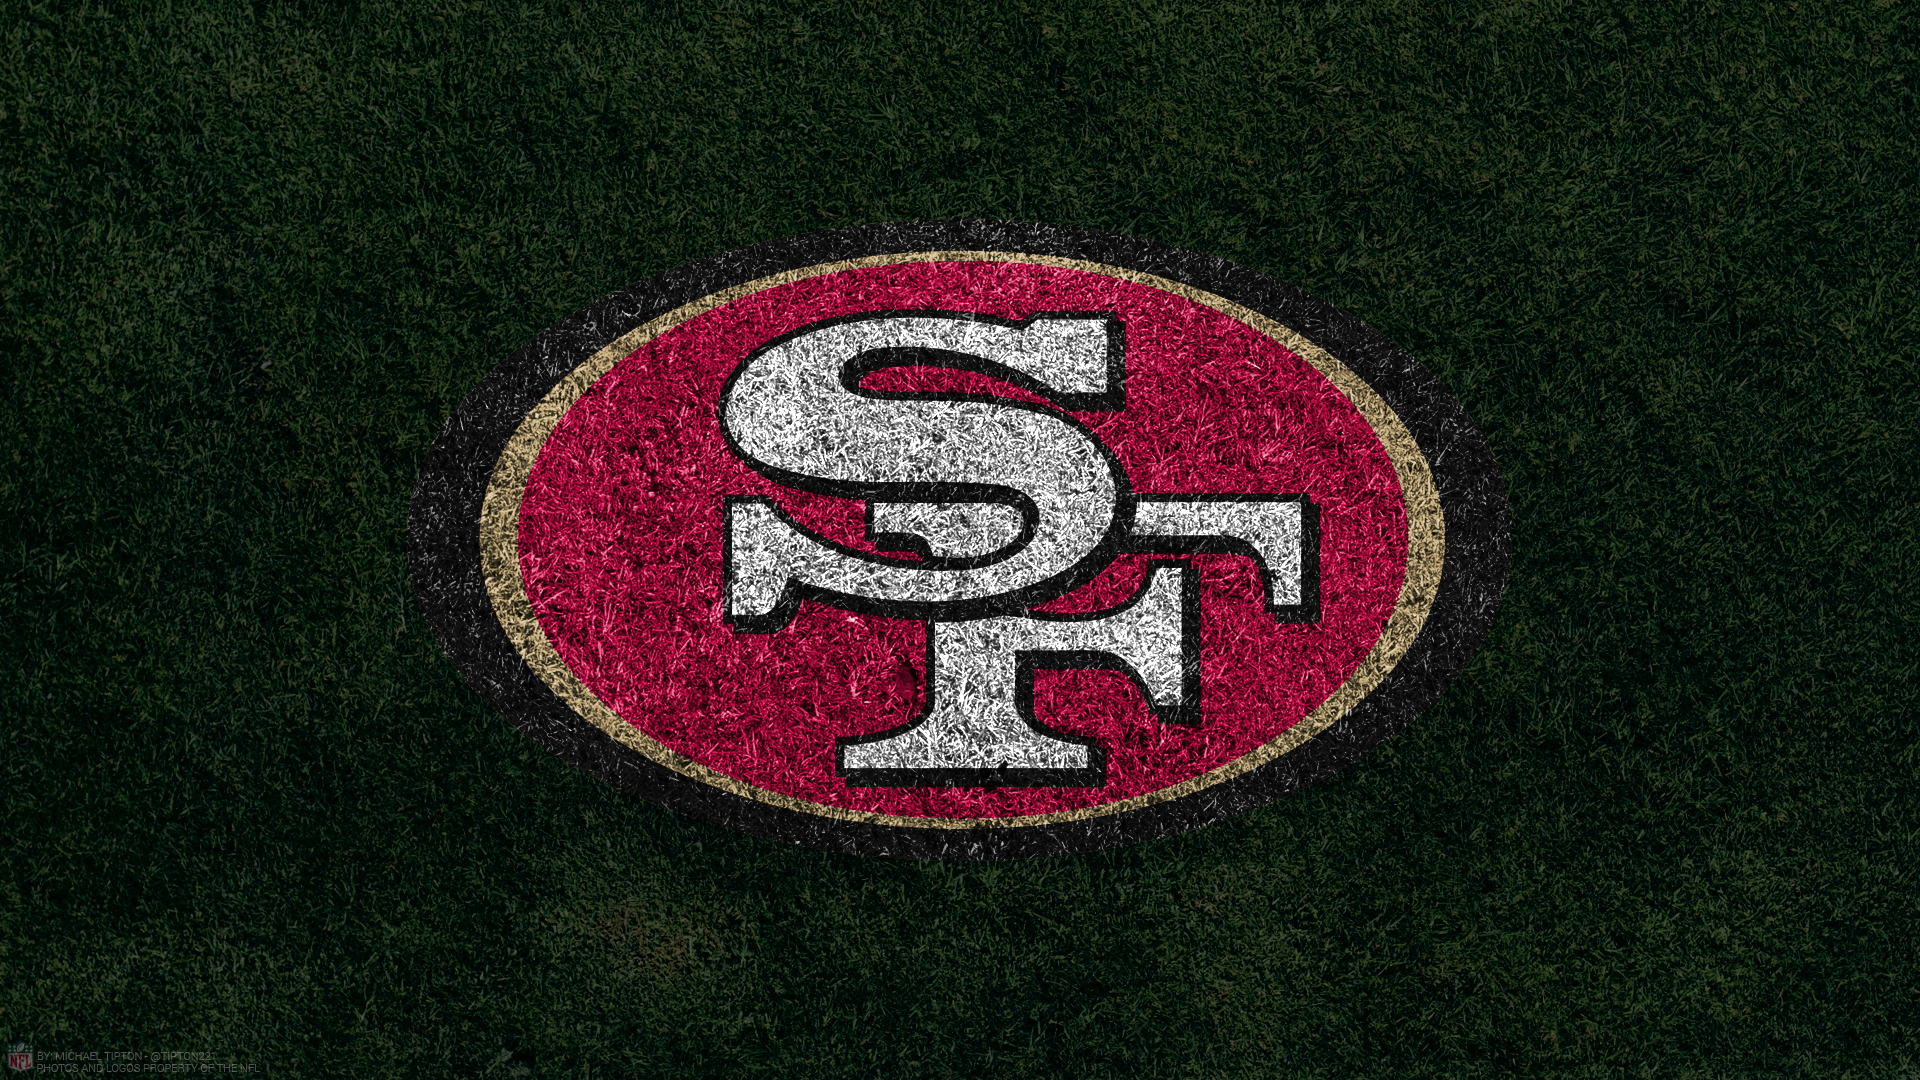 San Francisco 49ers Wallpaper. iPhone. Android